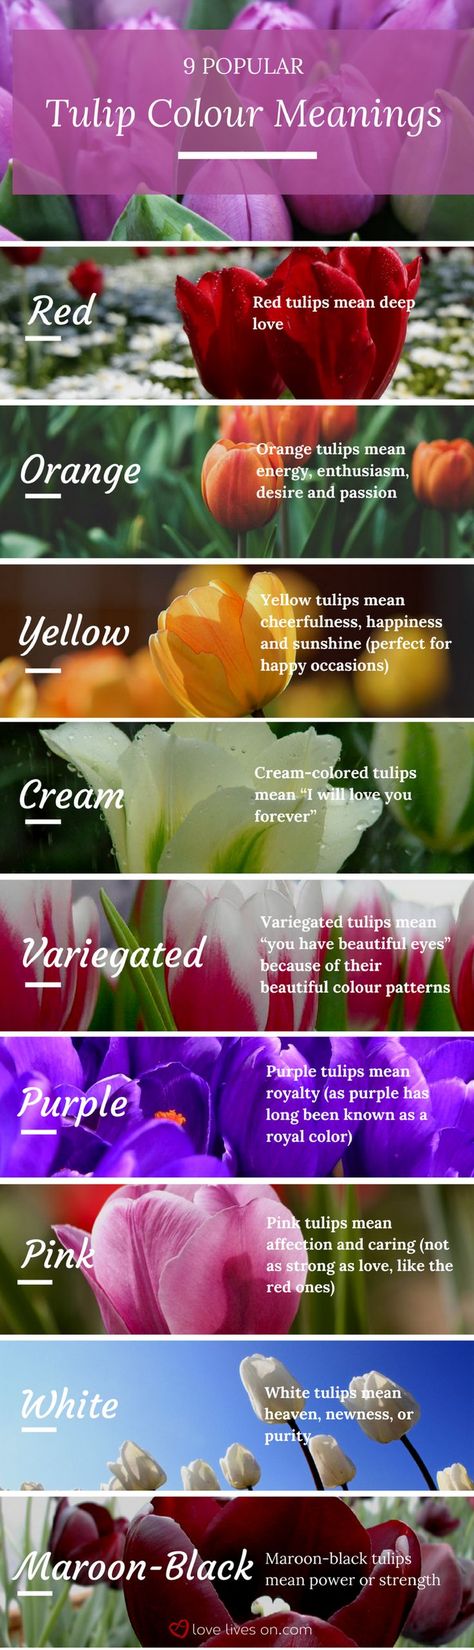 Infographic: 9 Popular Tulip Colour Meanings. Learn tulip colour meanings so you can create a meaningful sympathy or funeral arrangement. Floral, Gardening, Inspiration, Tulips, Meaning Of Tulips, Types Of Tulips, Tulips Meaning, Tulip Colors, Tulips Meaning Language Of Flowers